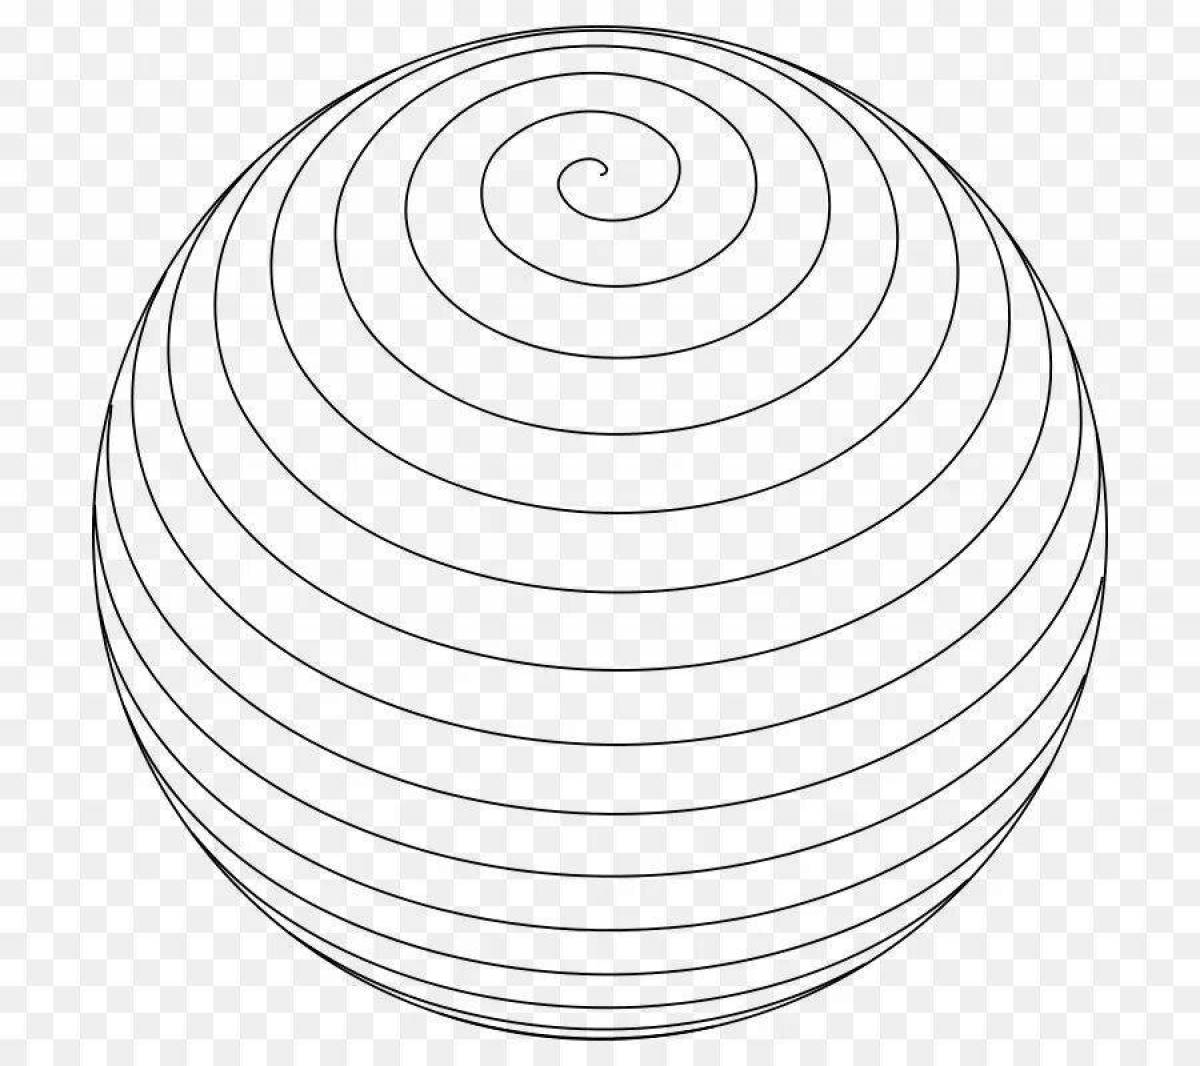 Magic round spiral coloring page